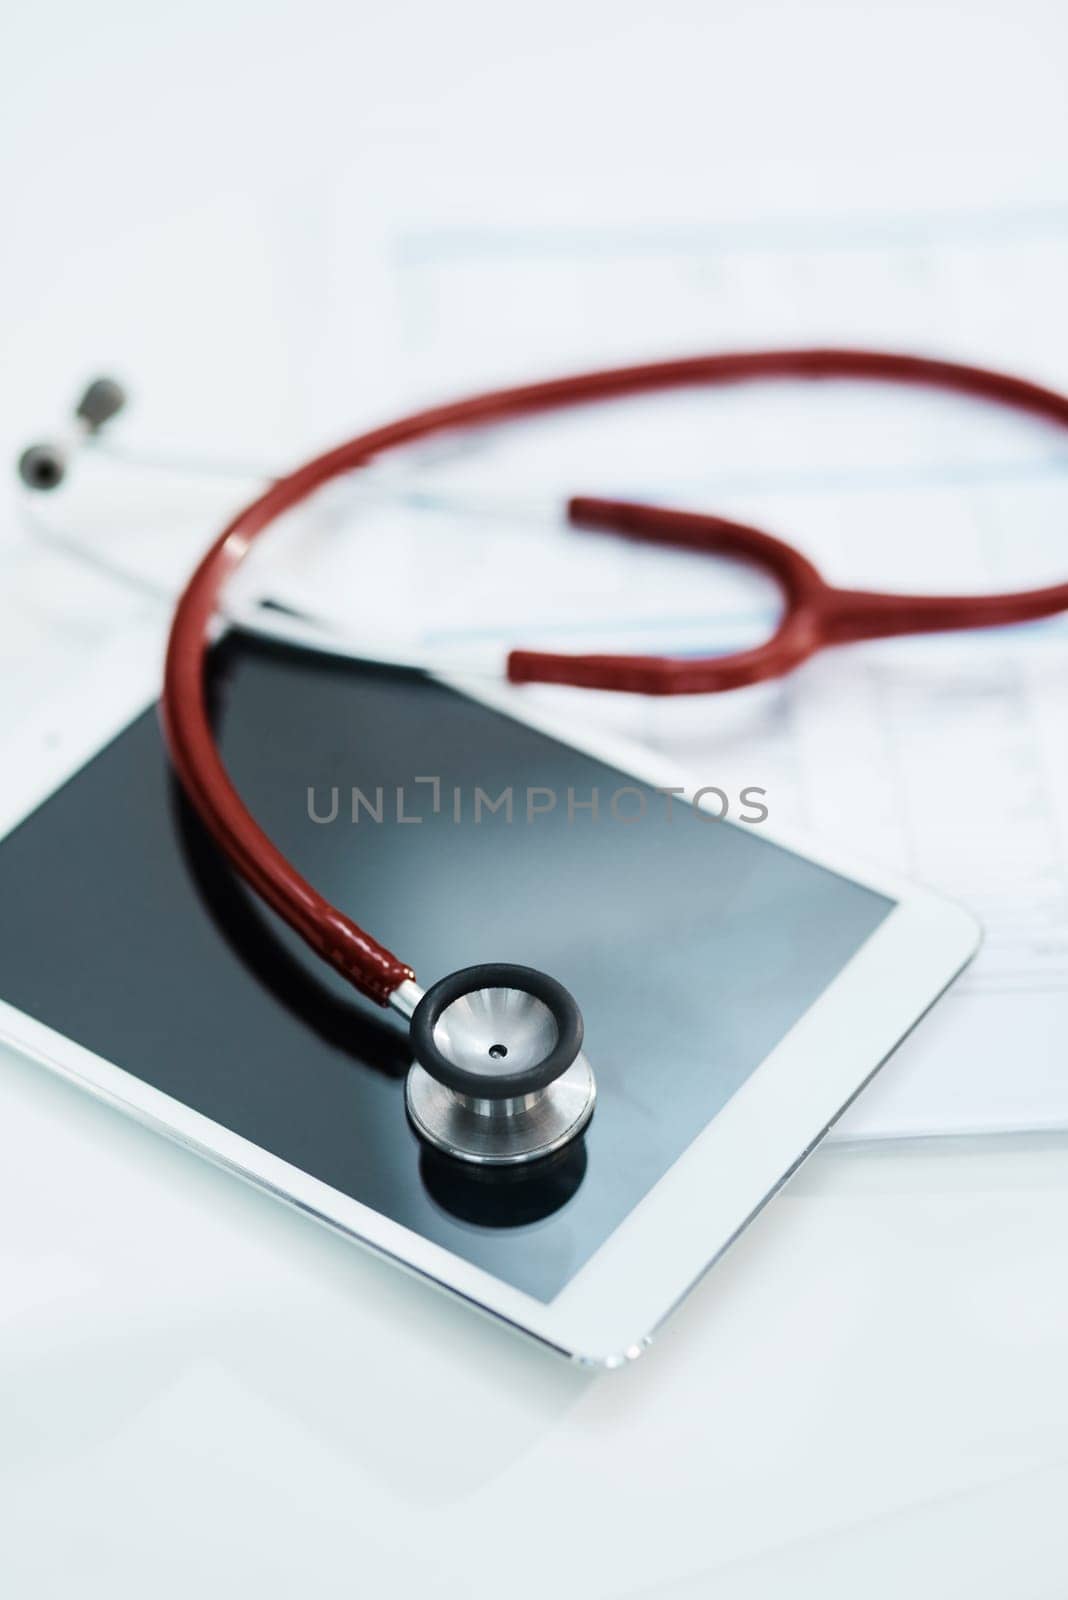 Hospital, telehealth and tablet with stethoscope on desk for medical website, healthcare and research. Documents, cardiology and digital tech, equipment and clipboard for online consulting service by YuriArcurs